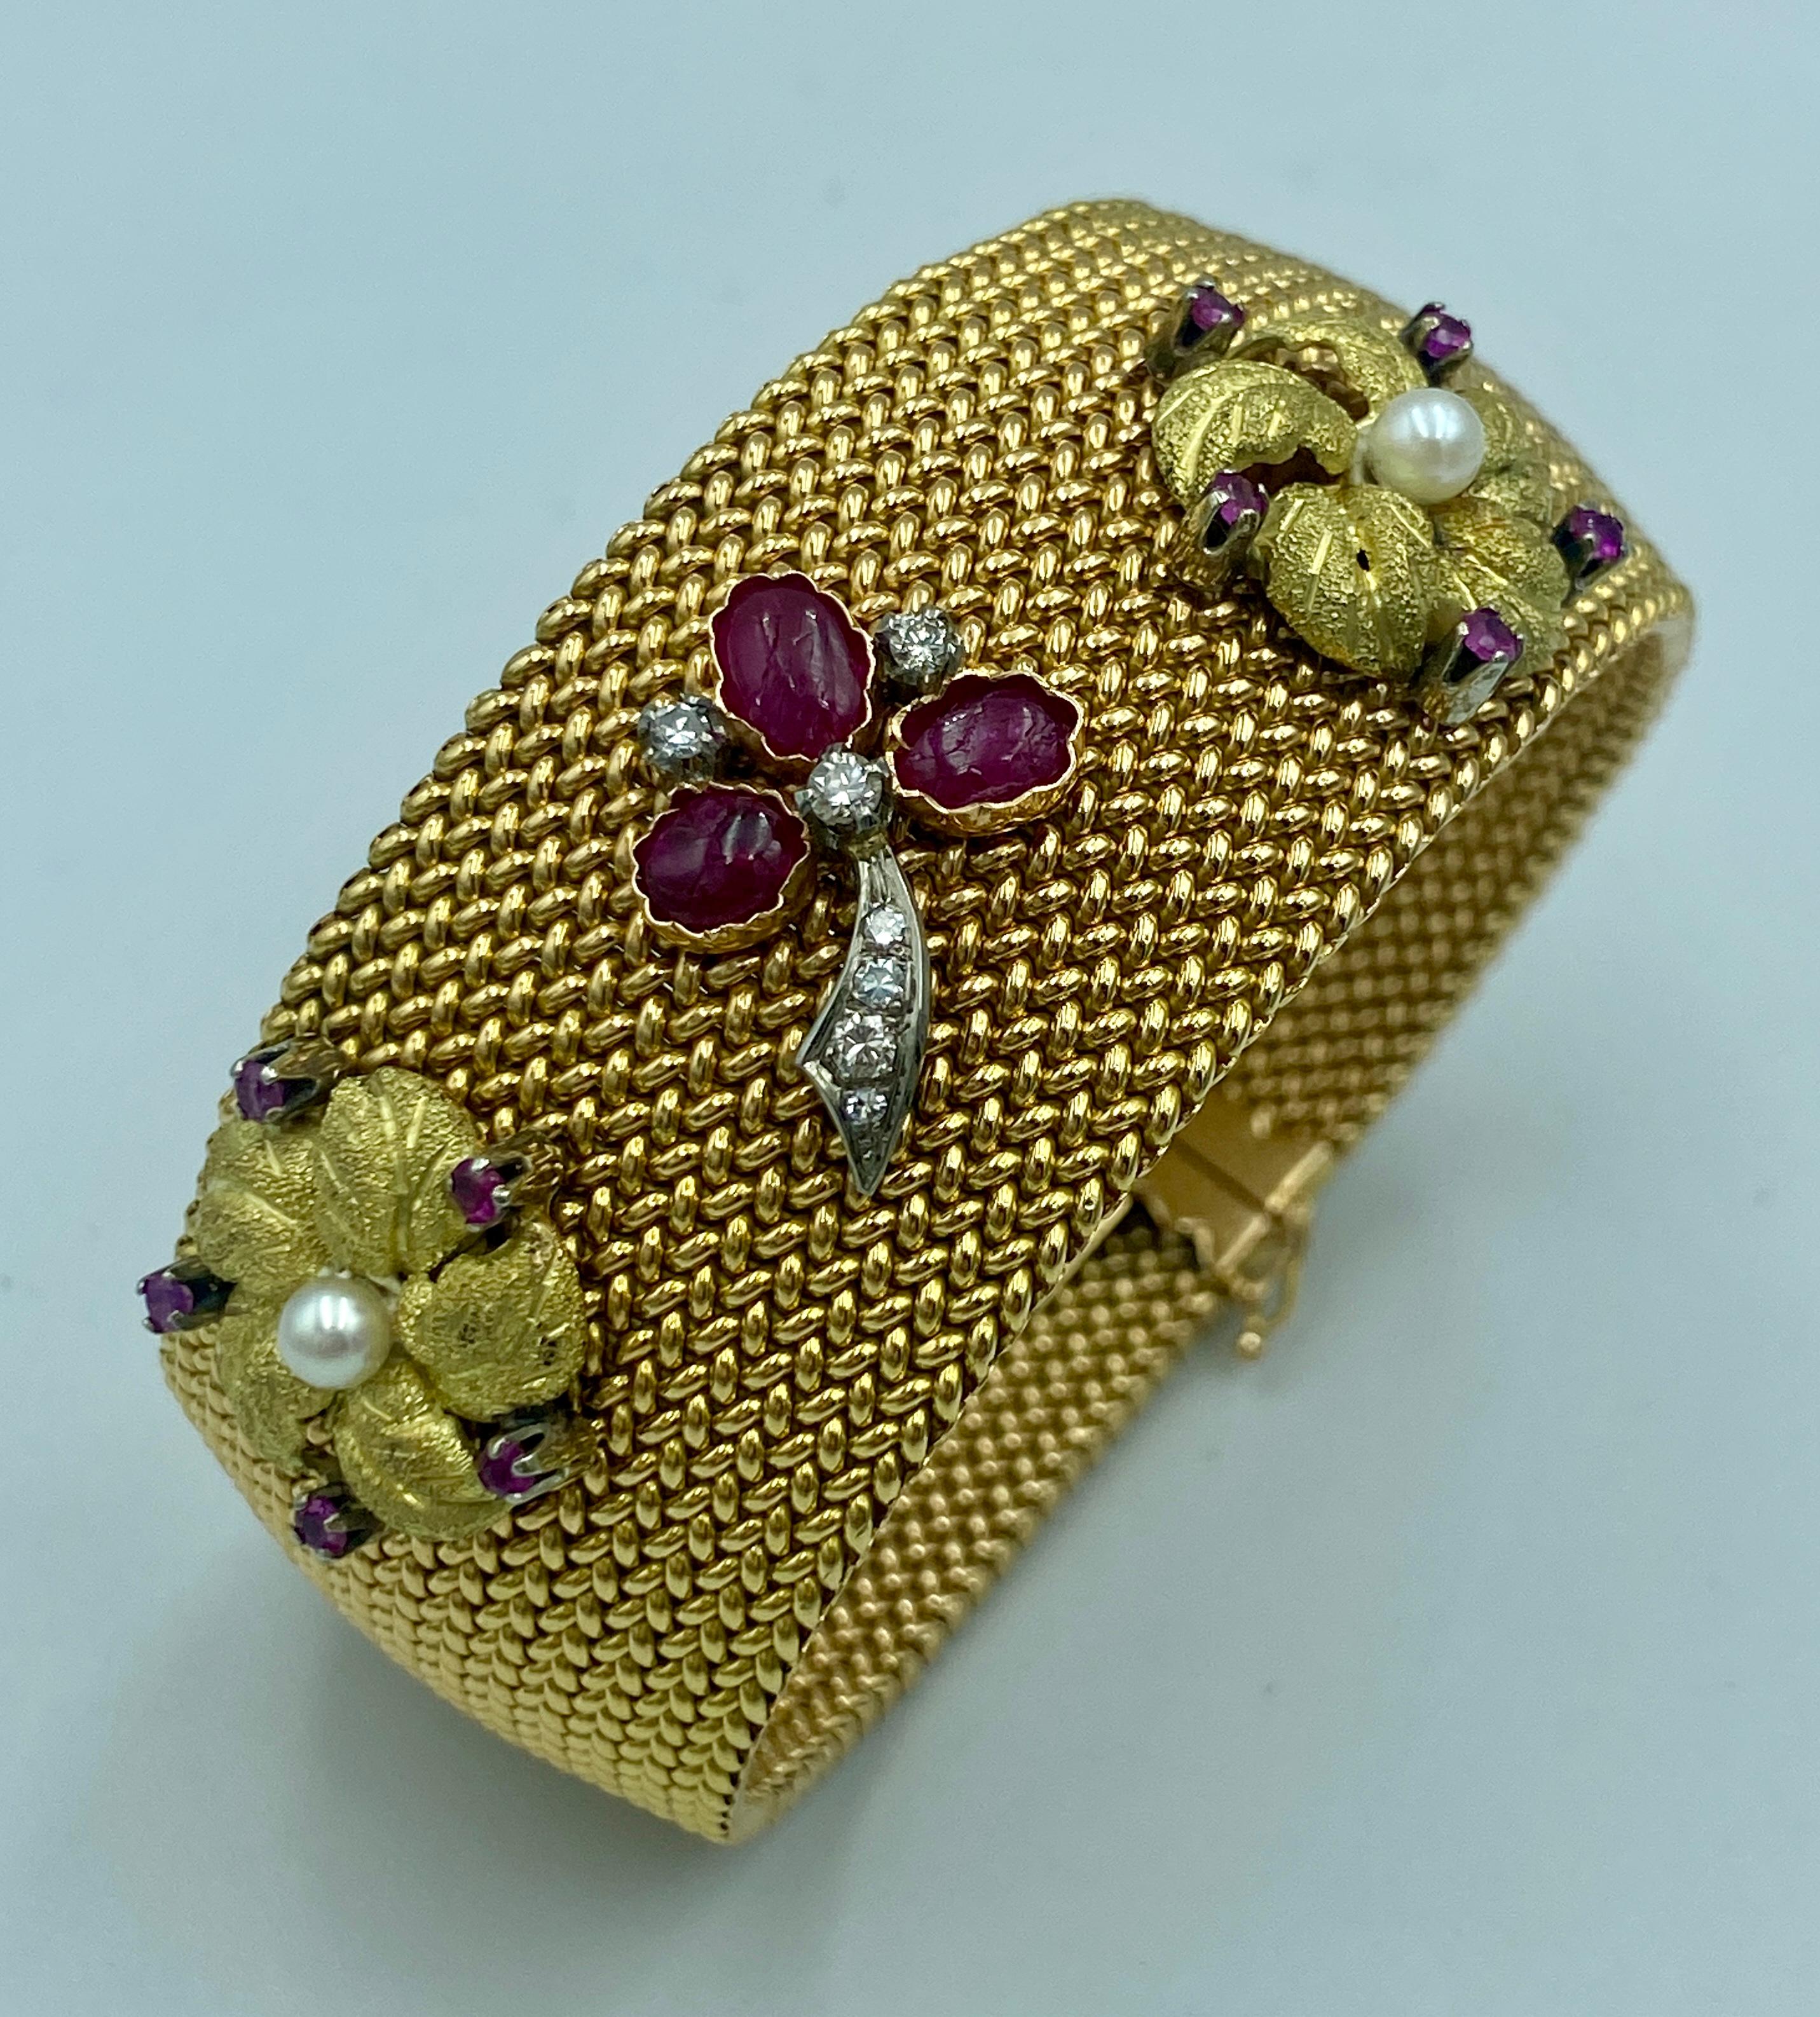 This is a beautiful 1950s Italian cuff bracelet made of hand woven 18k gold. The cuff is adorned with flower and leaf designs made of gold, Burmese rubies, pearls and diamonds. 